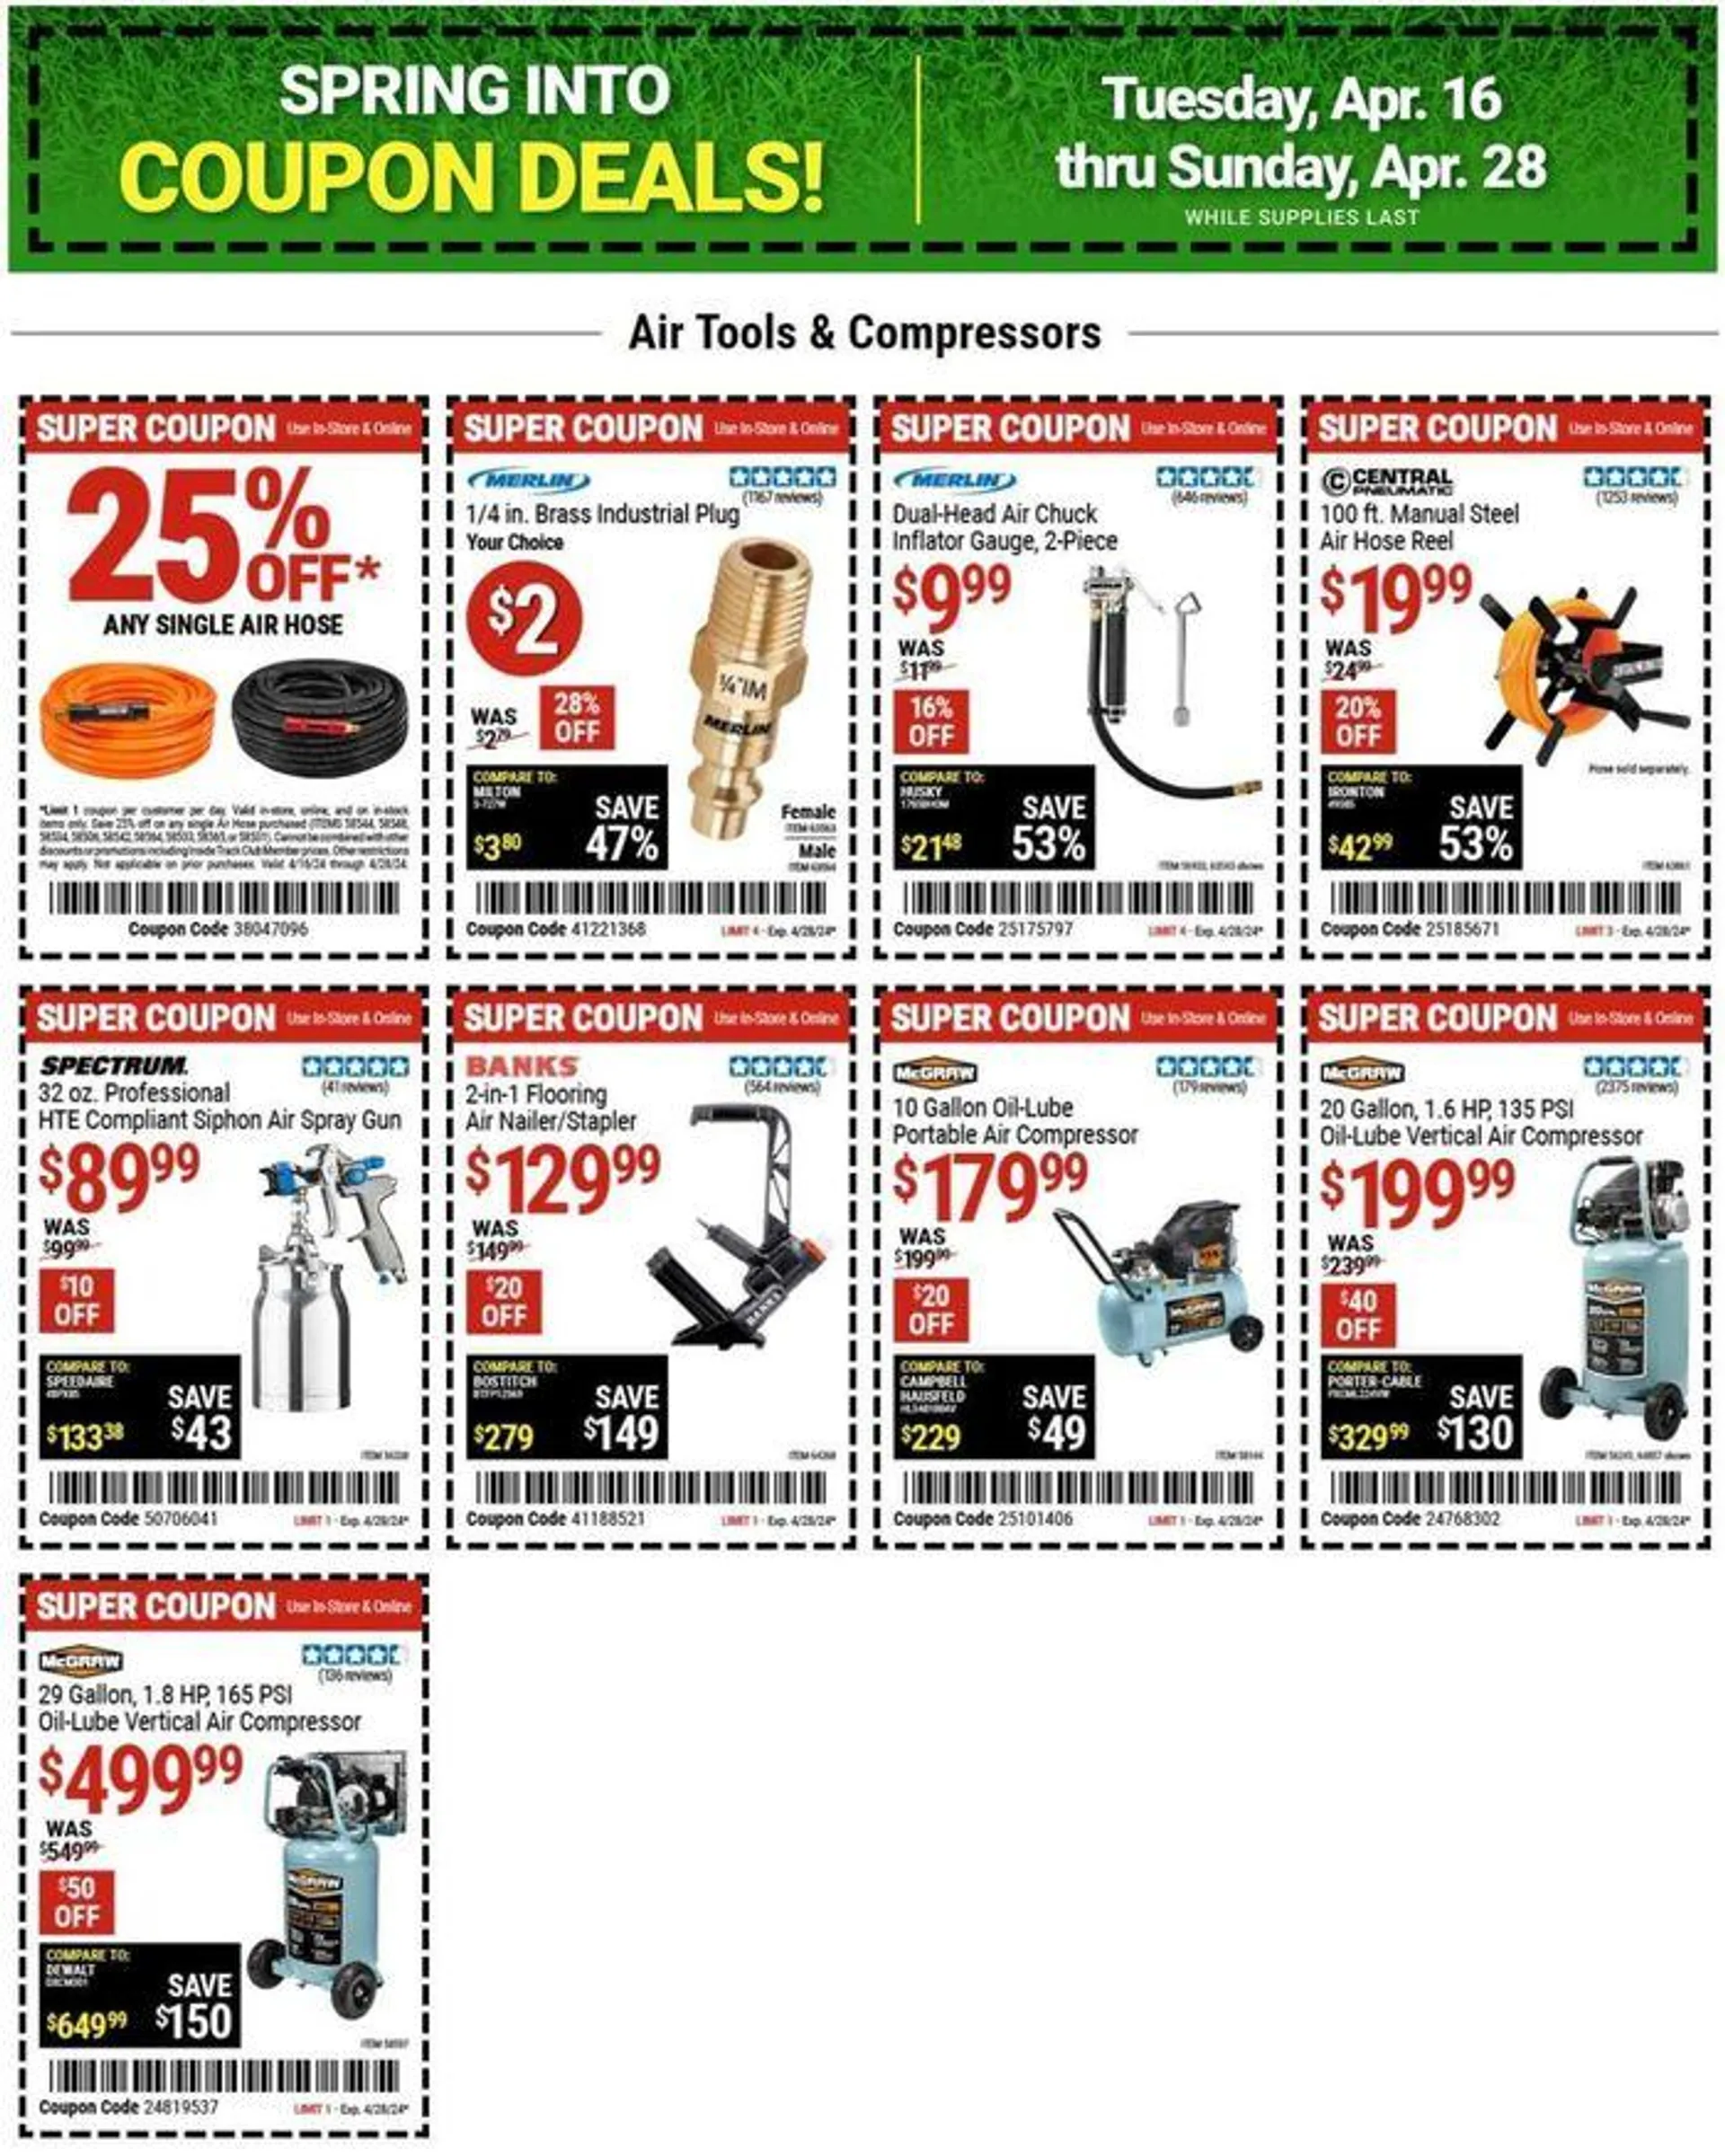 Spring Into Coupons Deals - 1